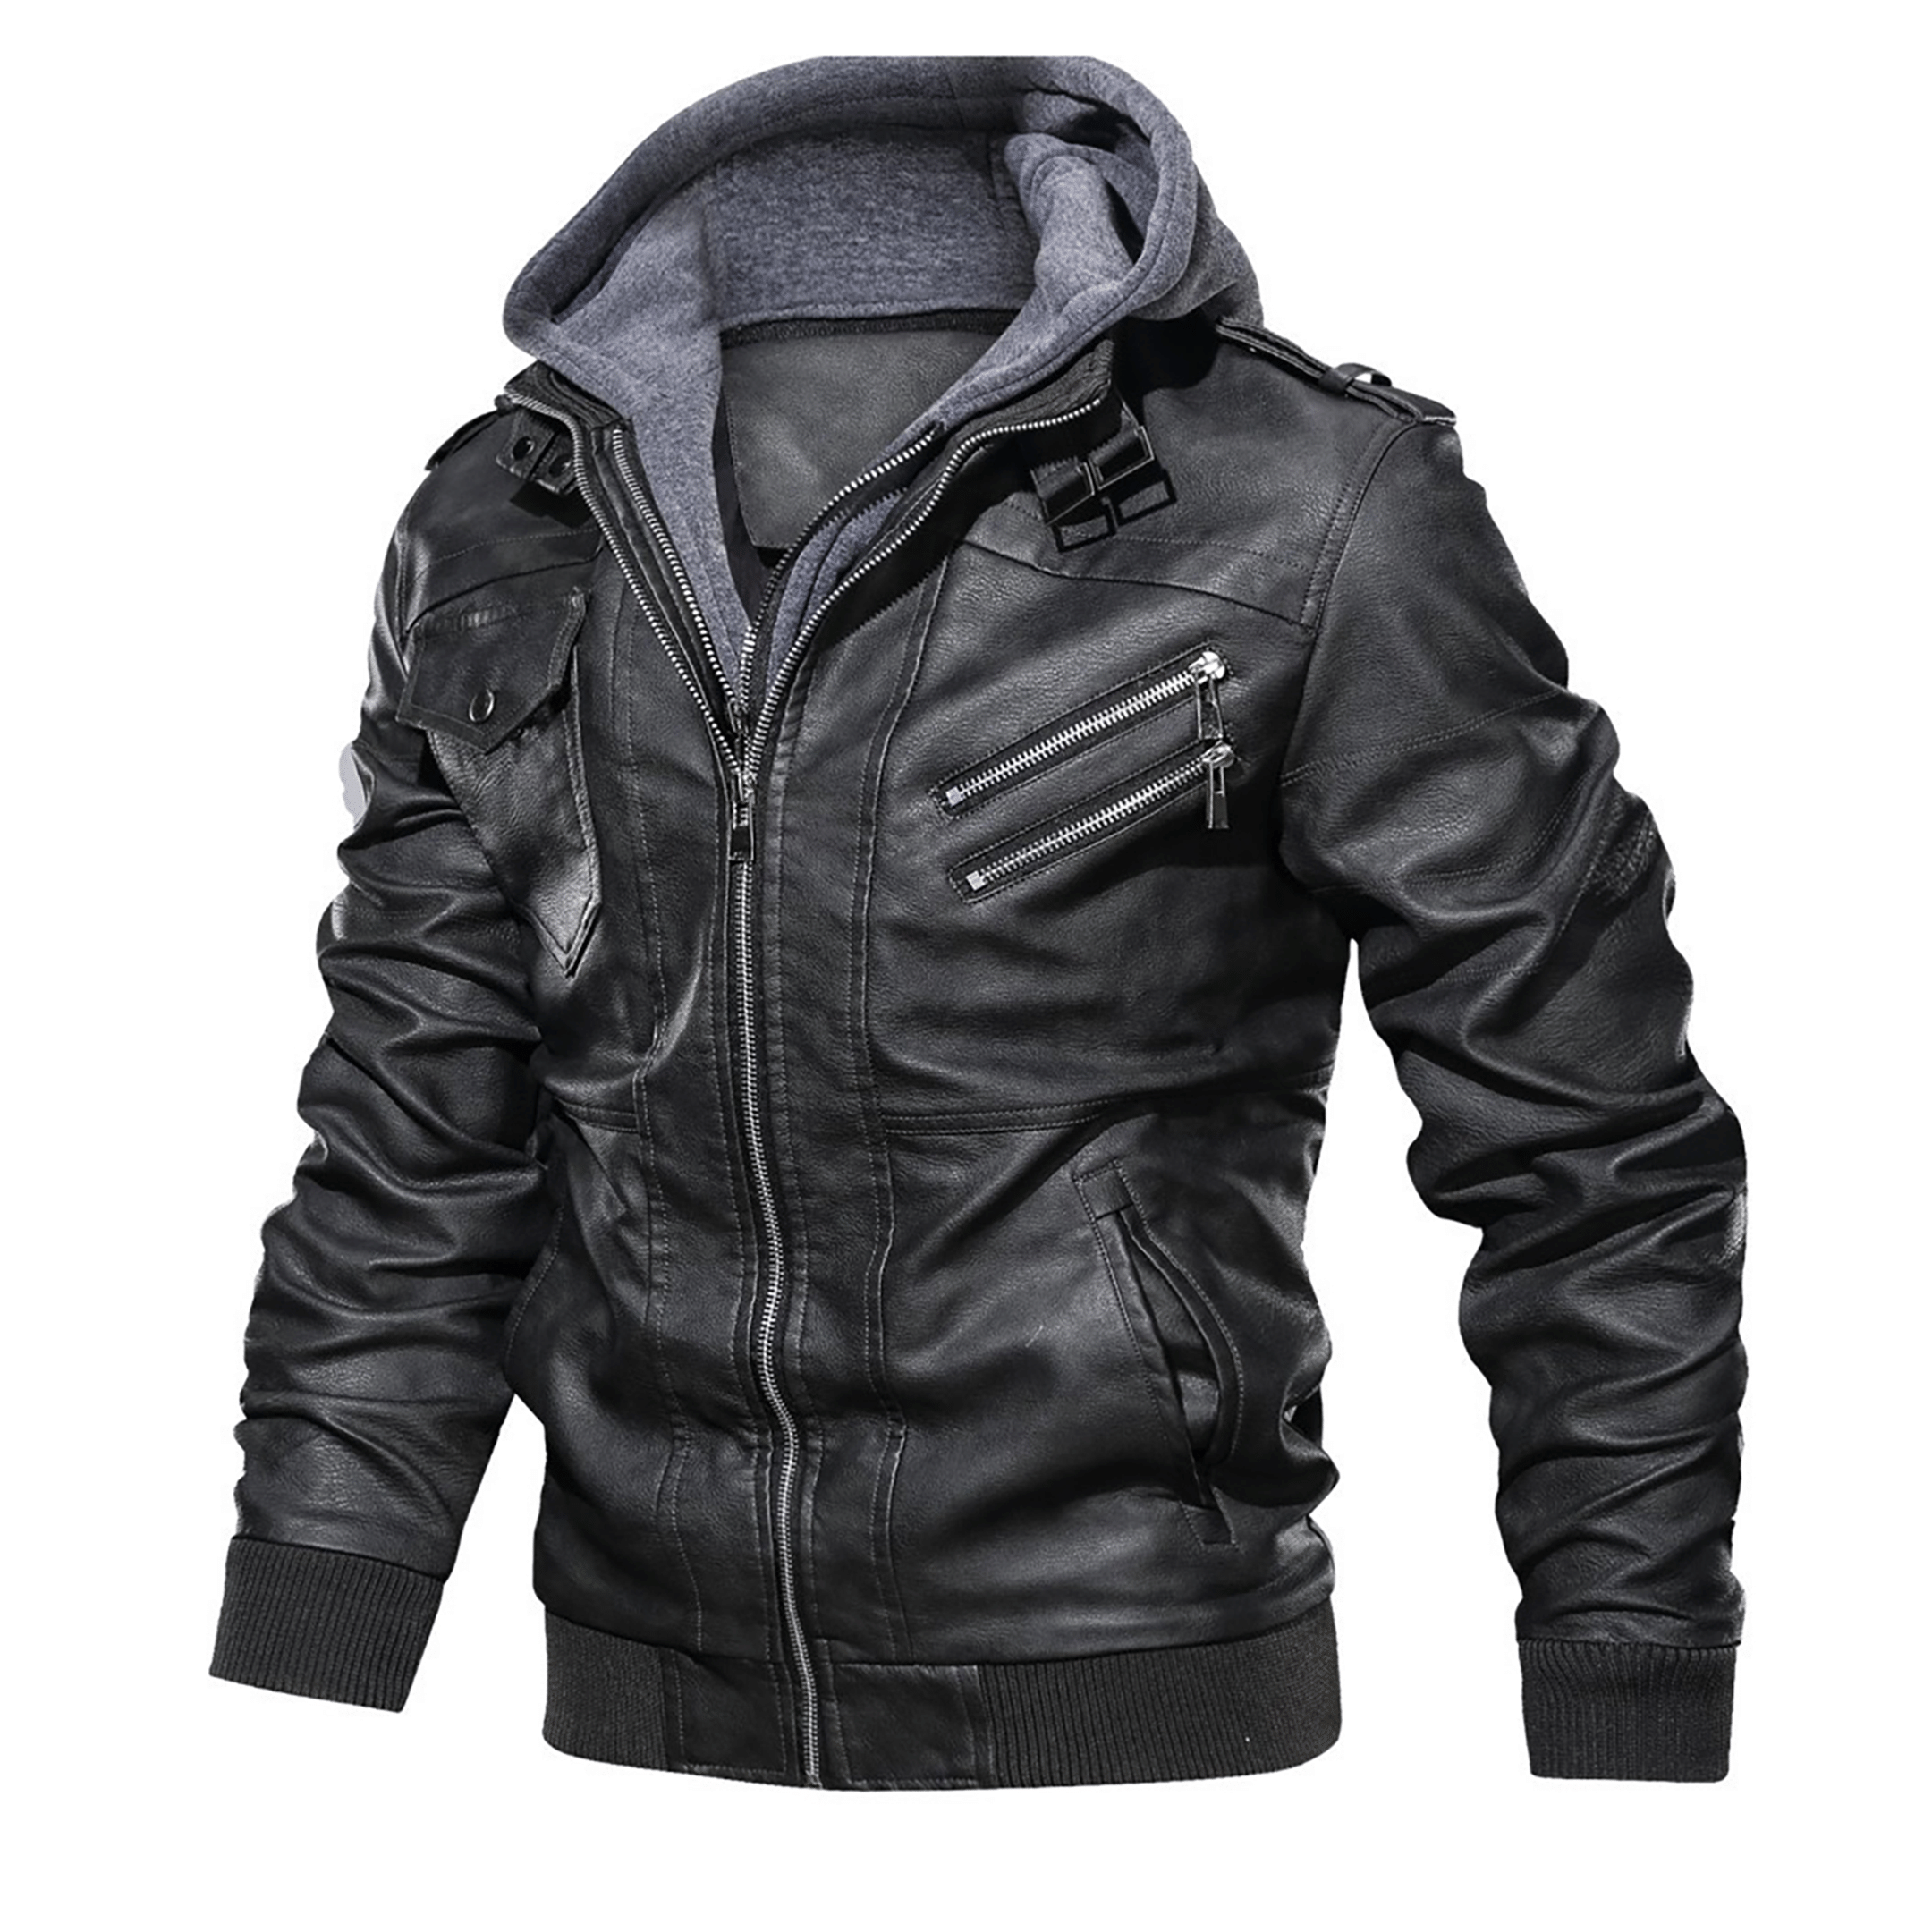 Top leather jackets and latest products 217